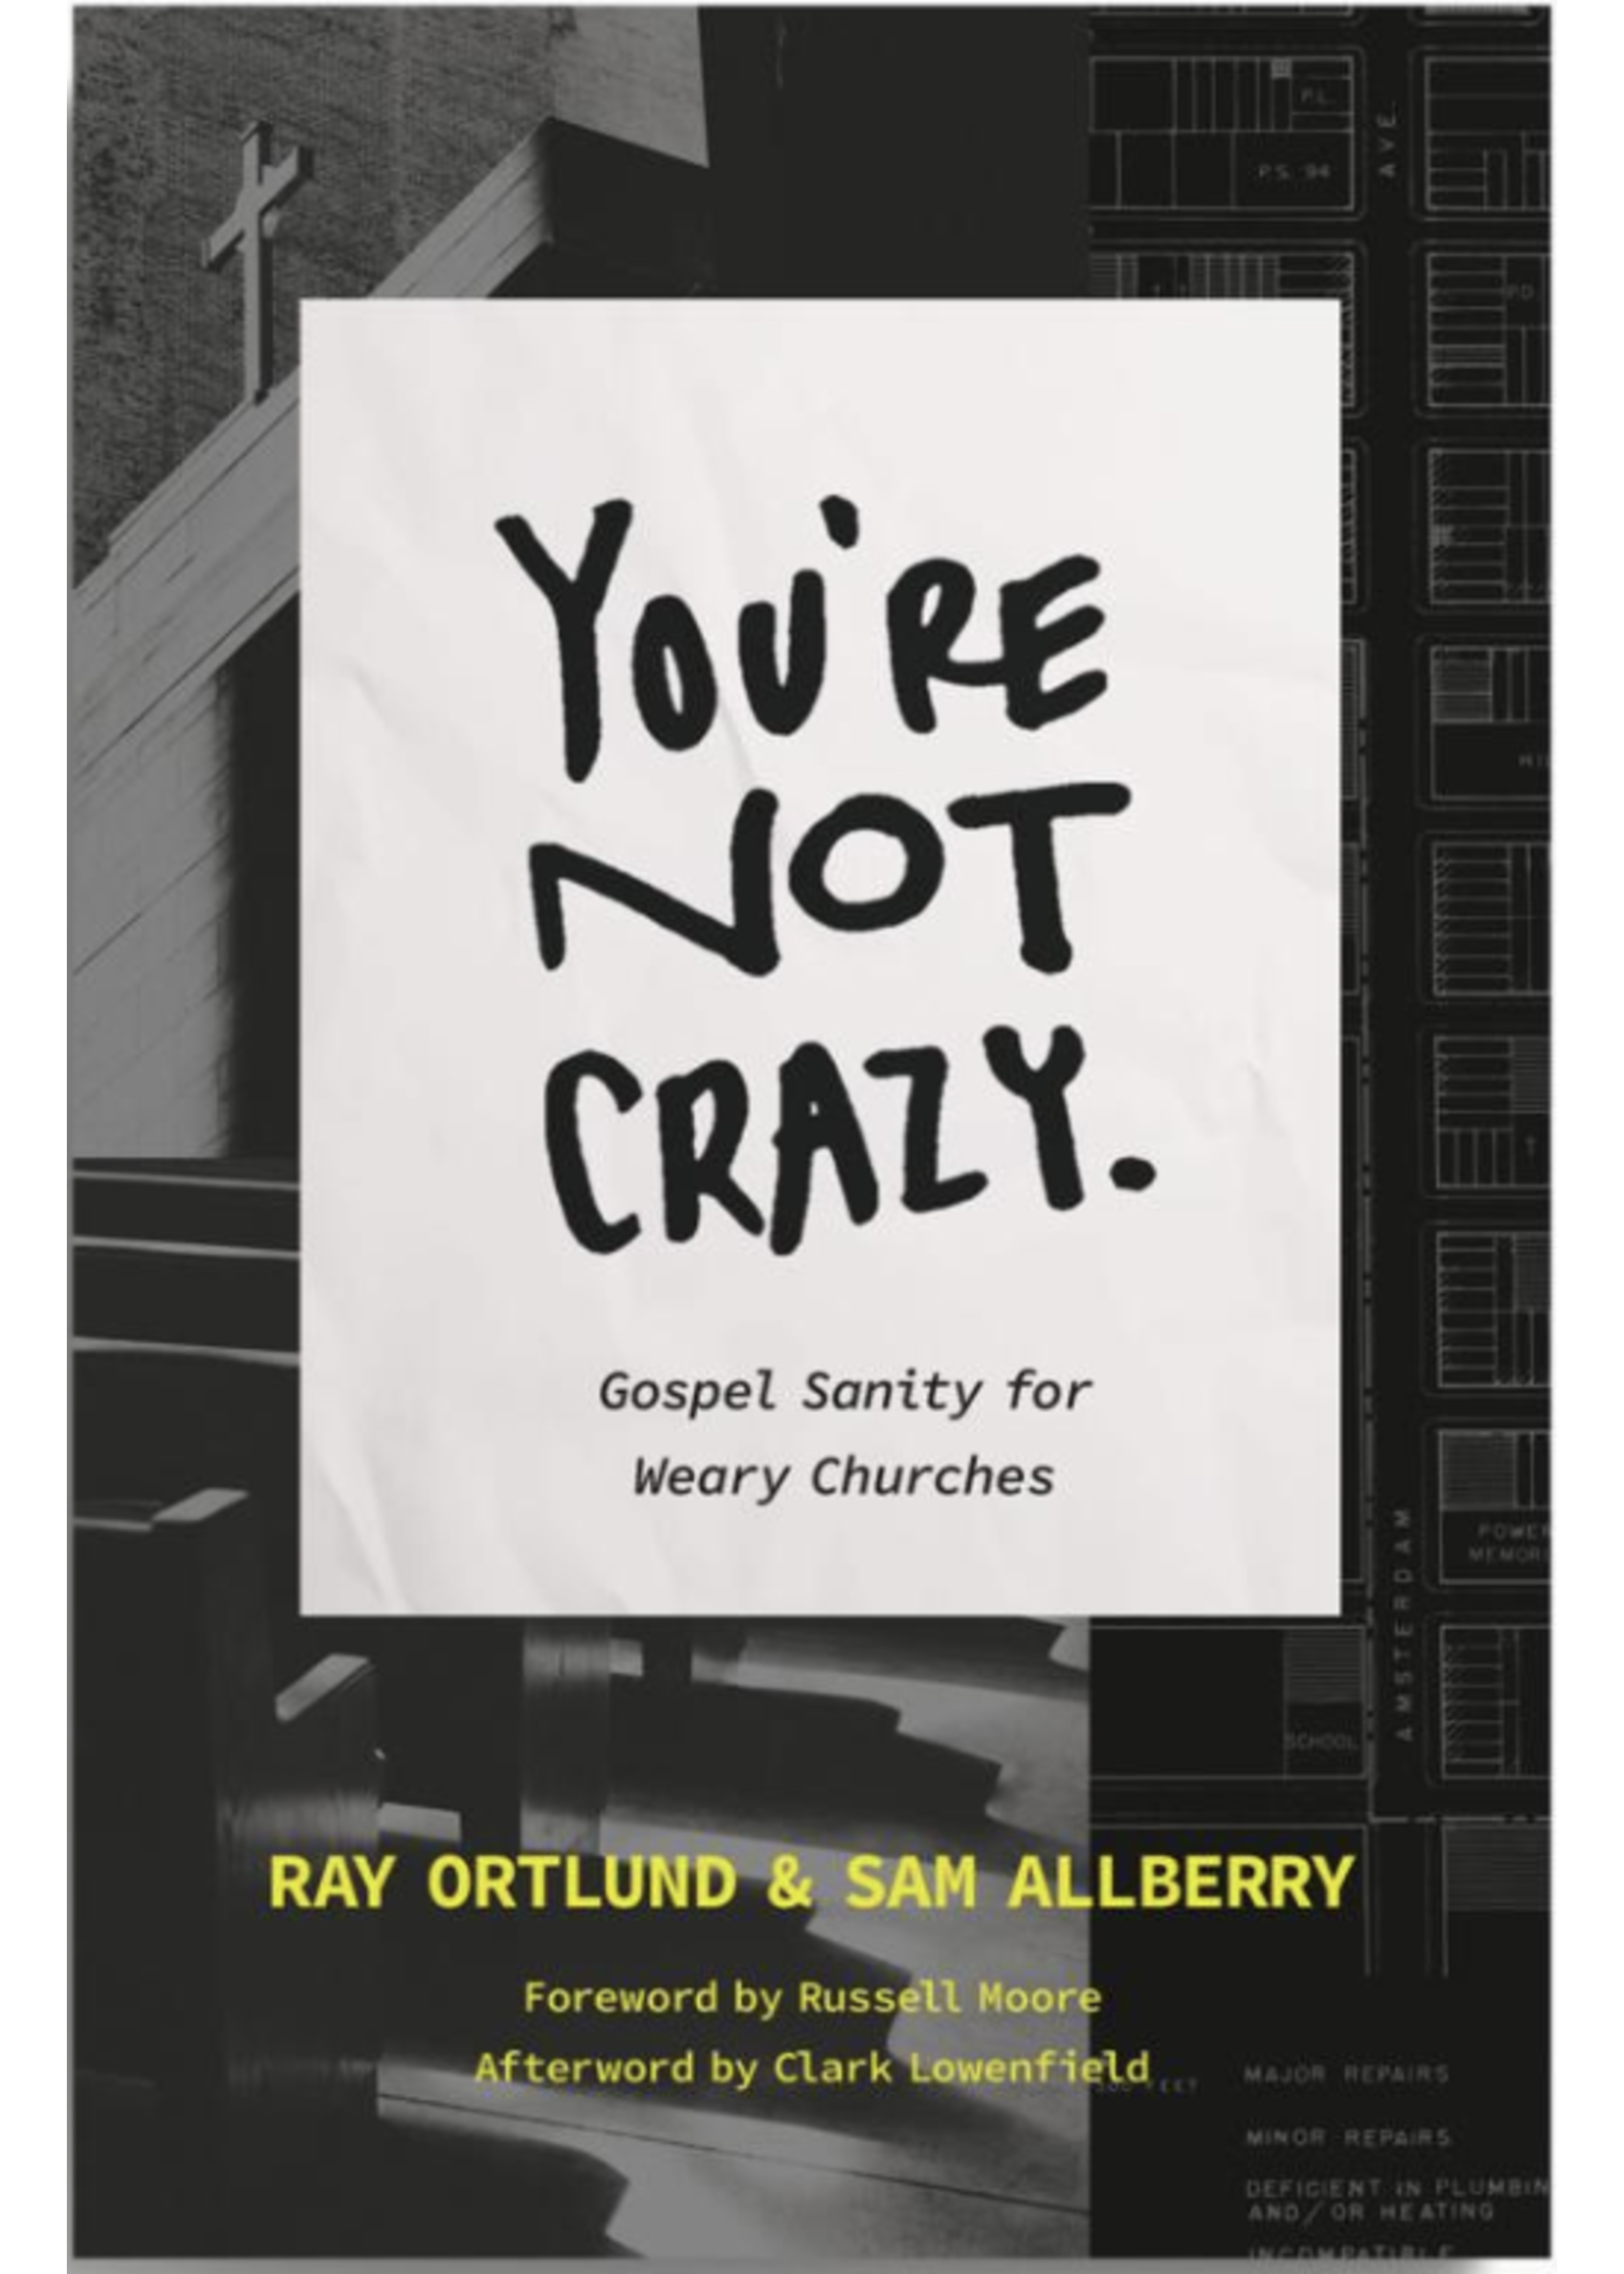 Crossway You're Not Crazy: Gospel Sanity For Weary Churches [Ray Ortlund & Sam Allberry]